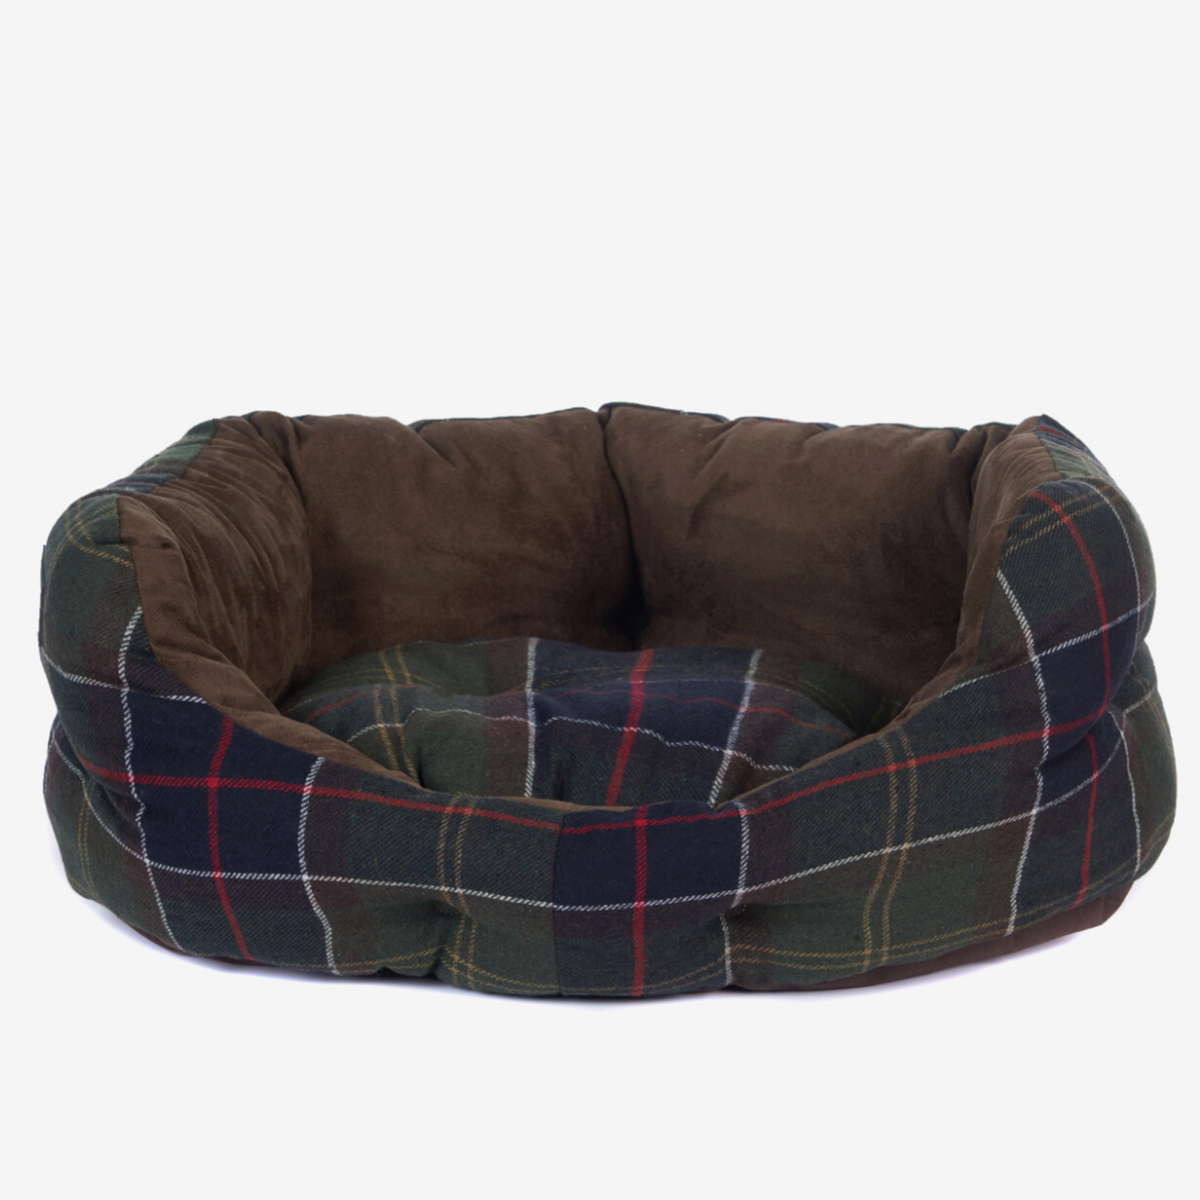 Barbour Quilted Dog Bed 30 Inch